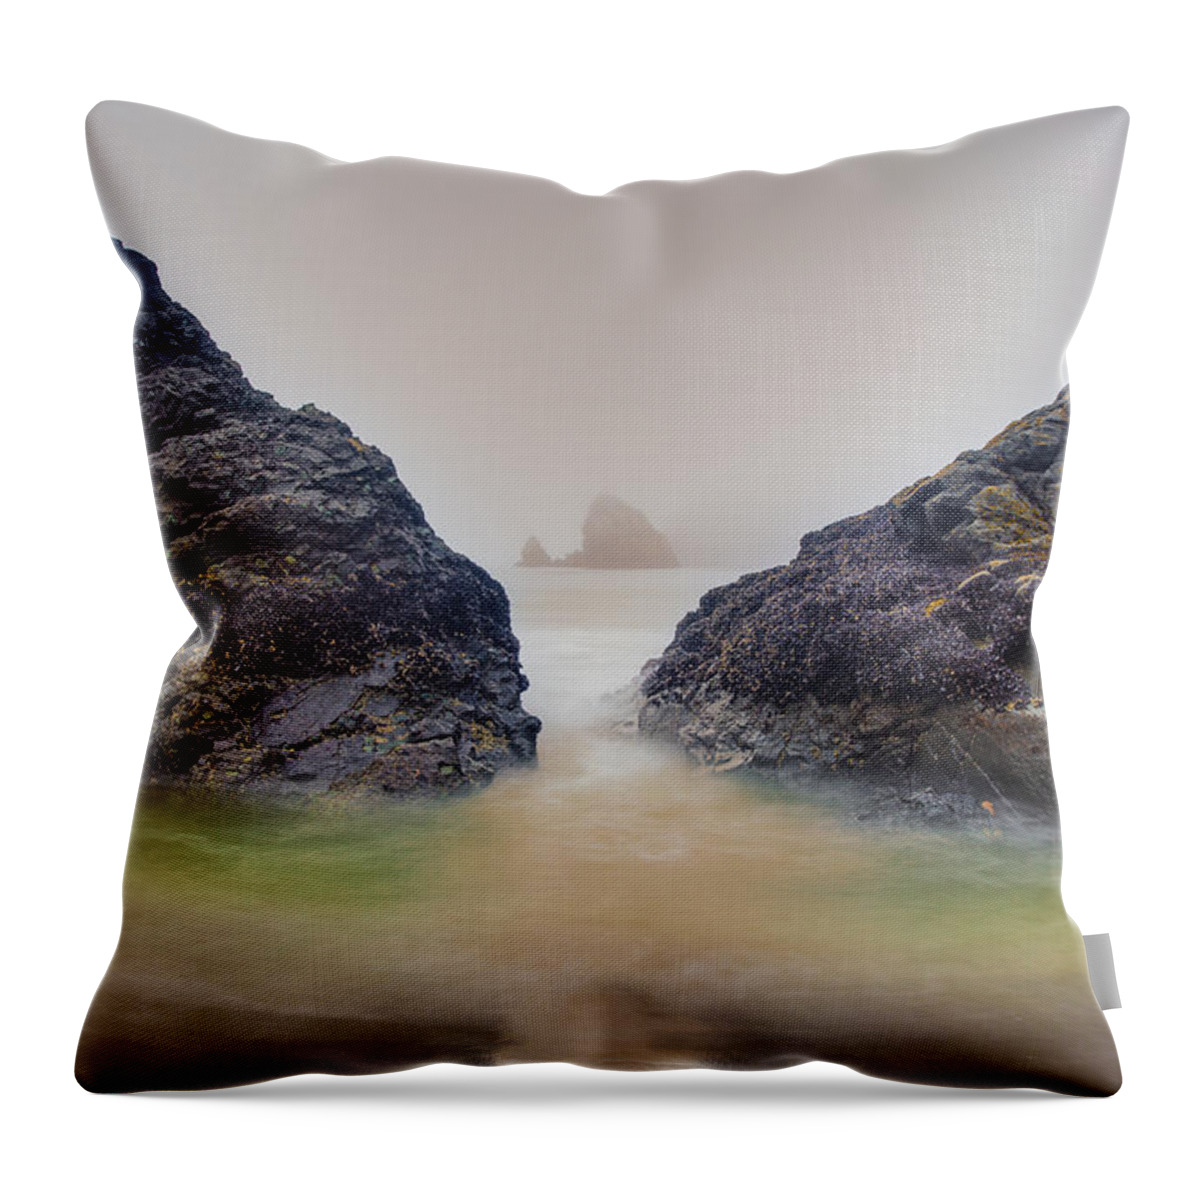 Pacific Ocean Throw Pillow featuring the photograph Moment of Discovery by Adam Mateo Fierro